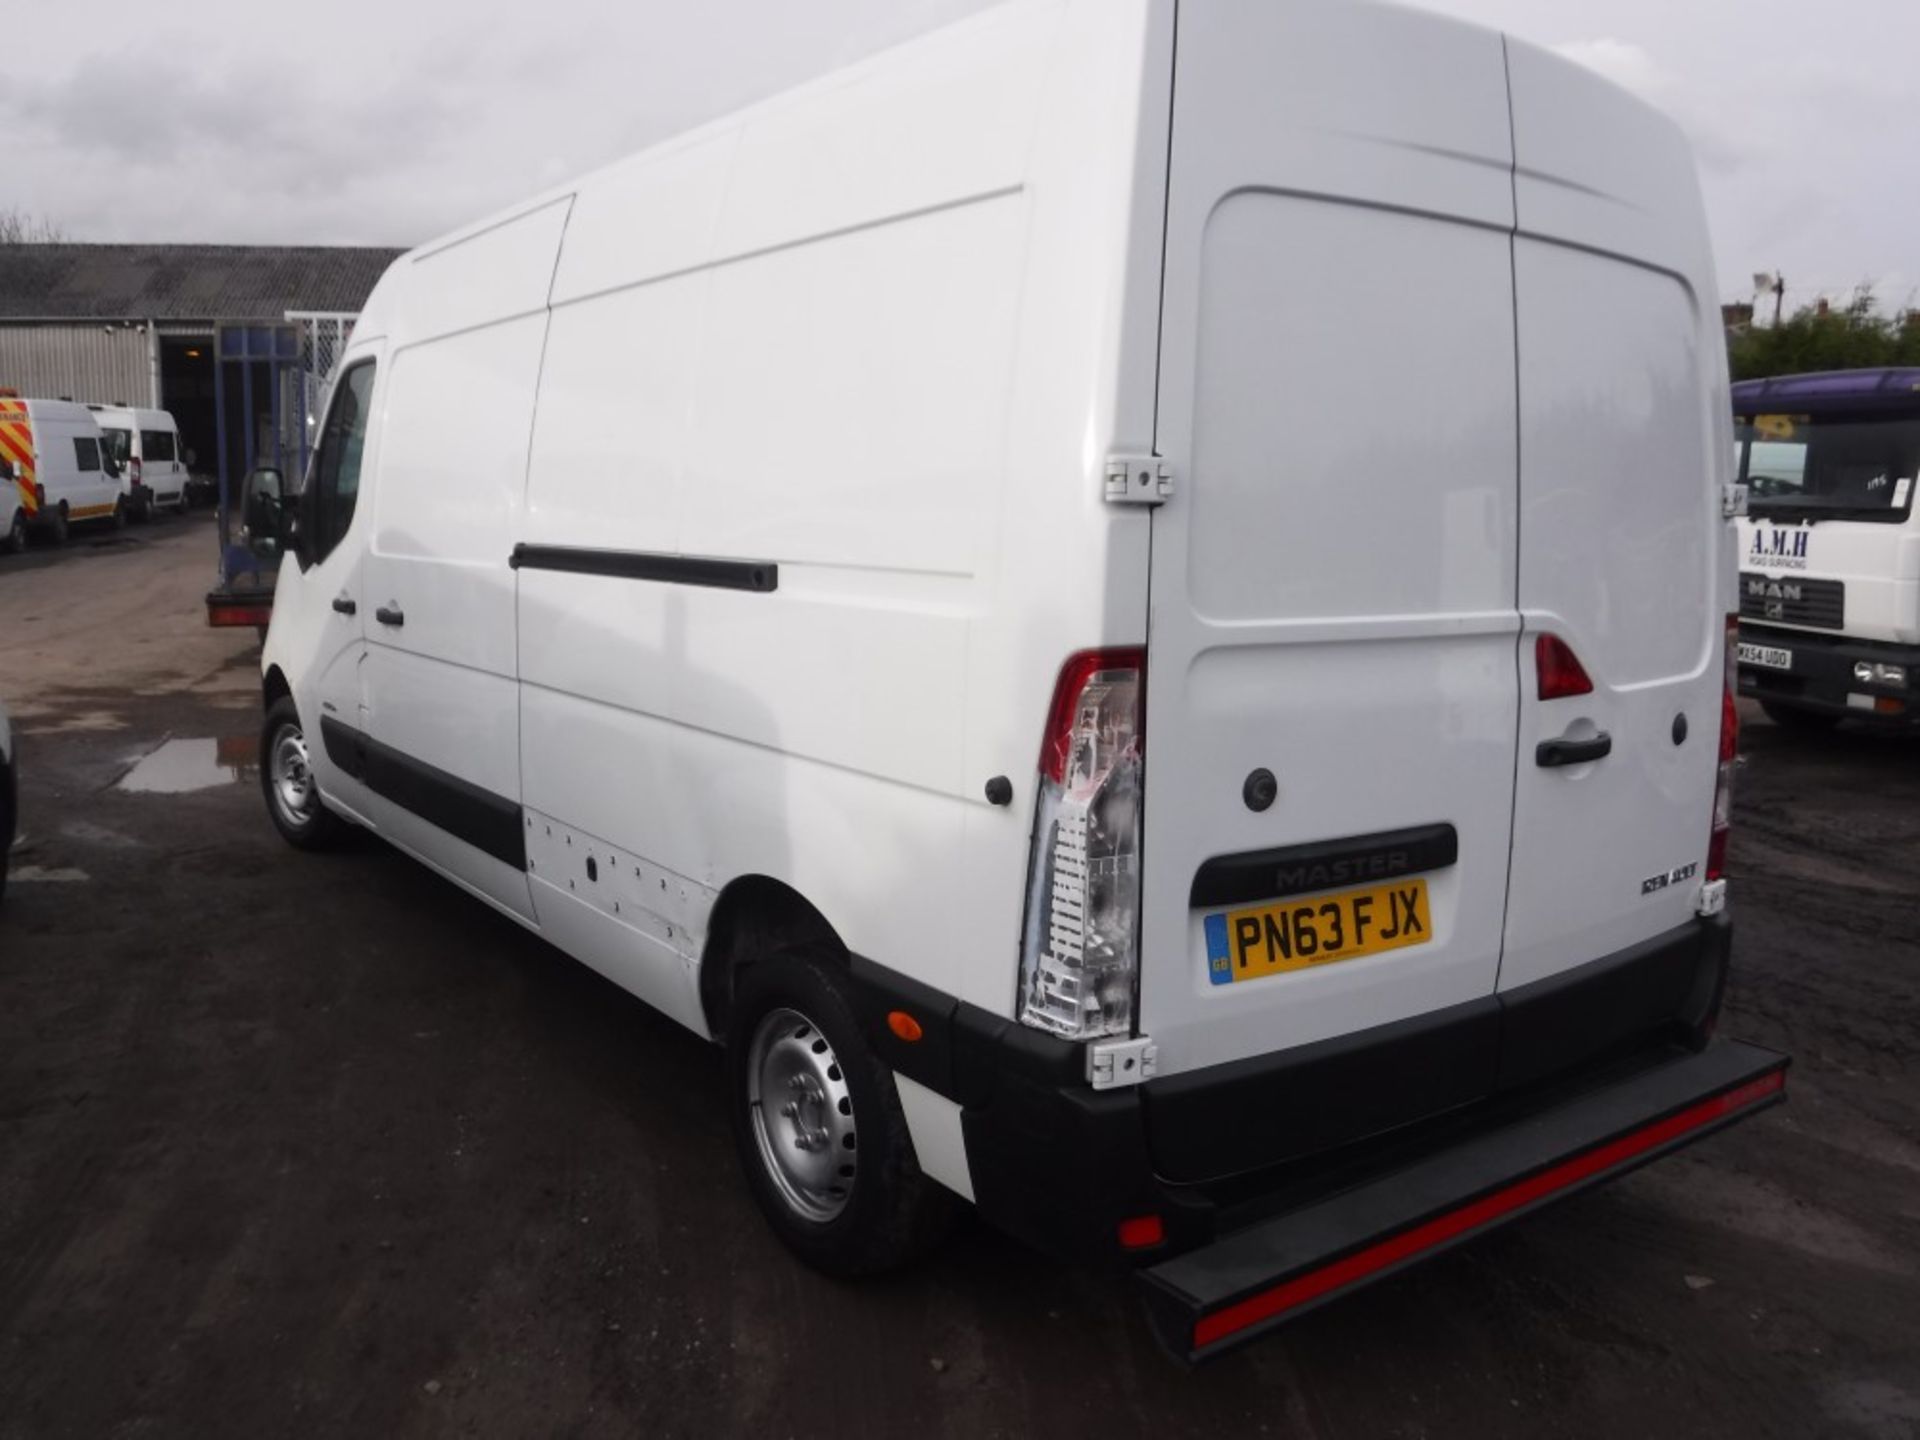 63 reg RENAULT MASTER LM35 DCI 100, 1ST REG 01/14, 151618M NOT WARRANTED, V5 HERE, 1 OWNER FROM - Image 3 of 5